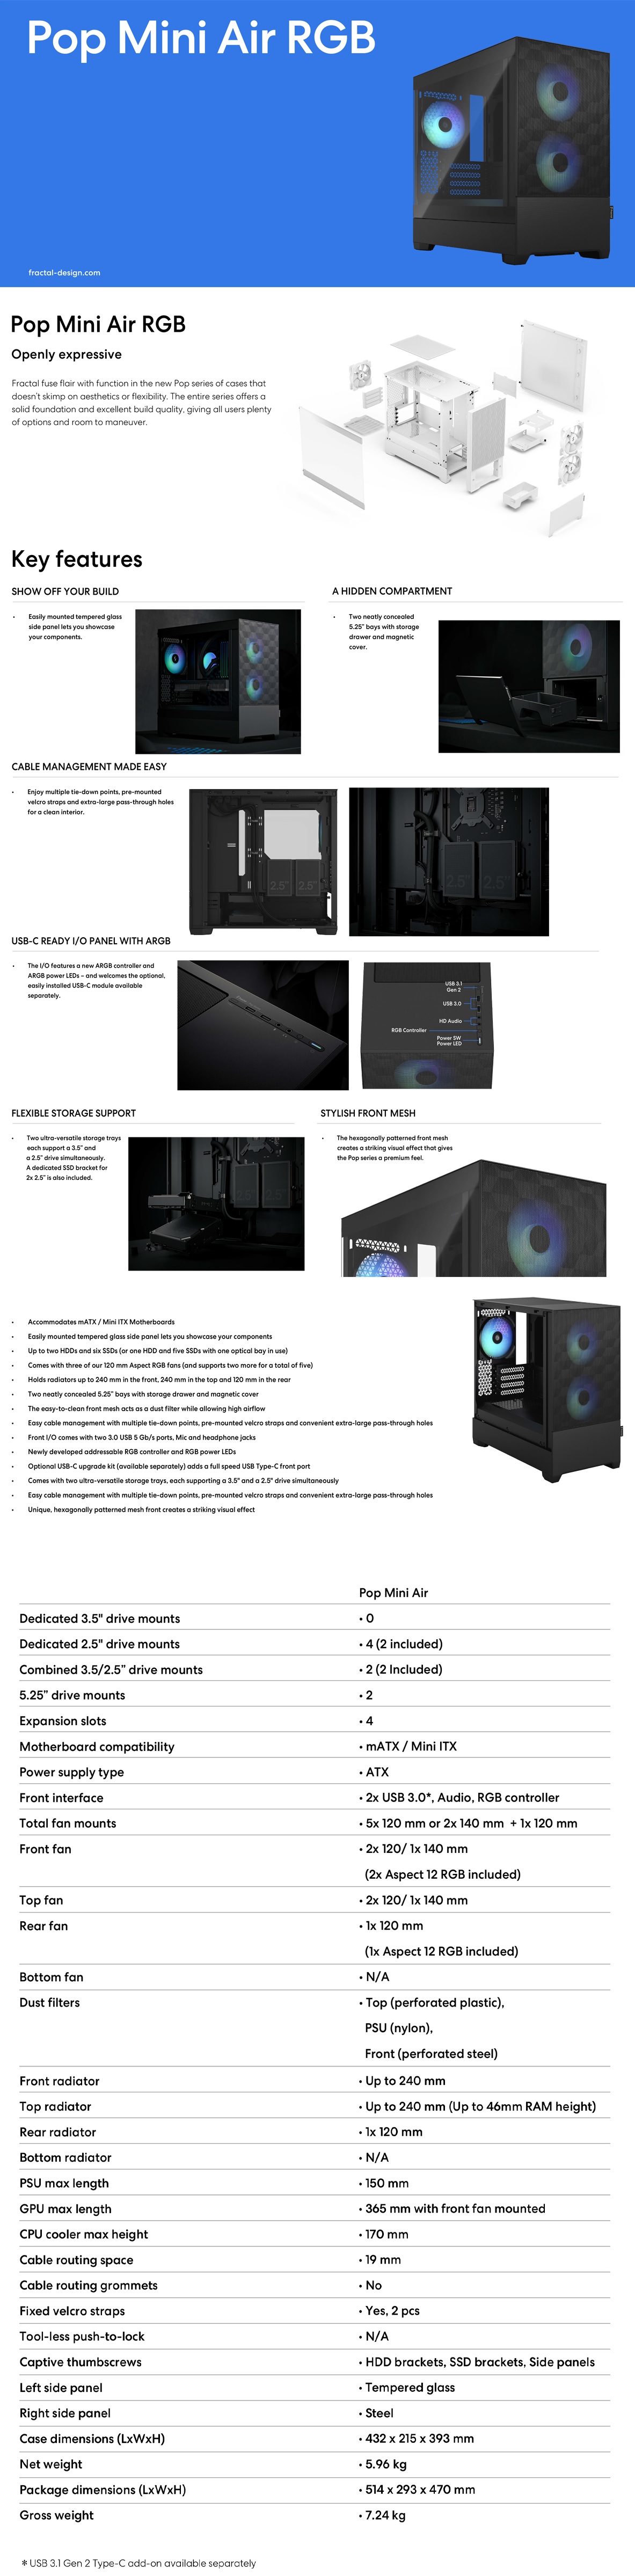 A large marketing image providing additional information about the product Fractal Design Pop Mini Air RGB TG Clear Tint Micro Tower Case -White - Additional alt info not provided